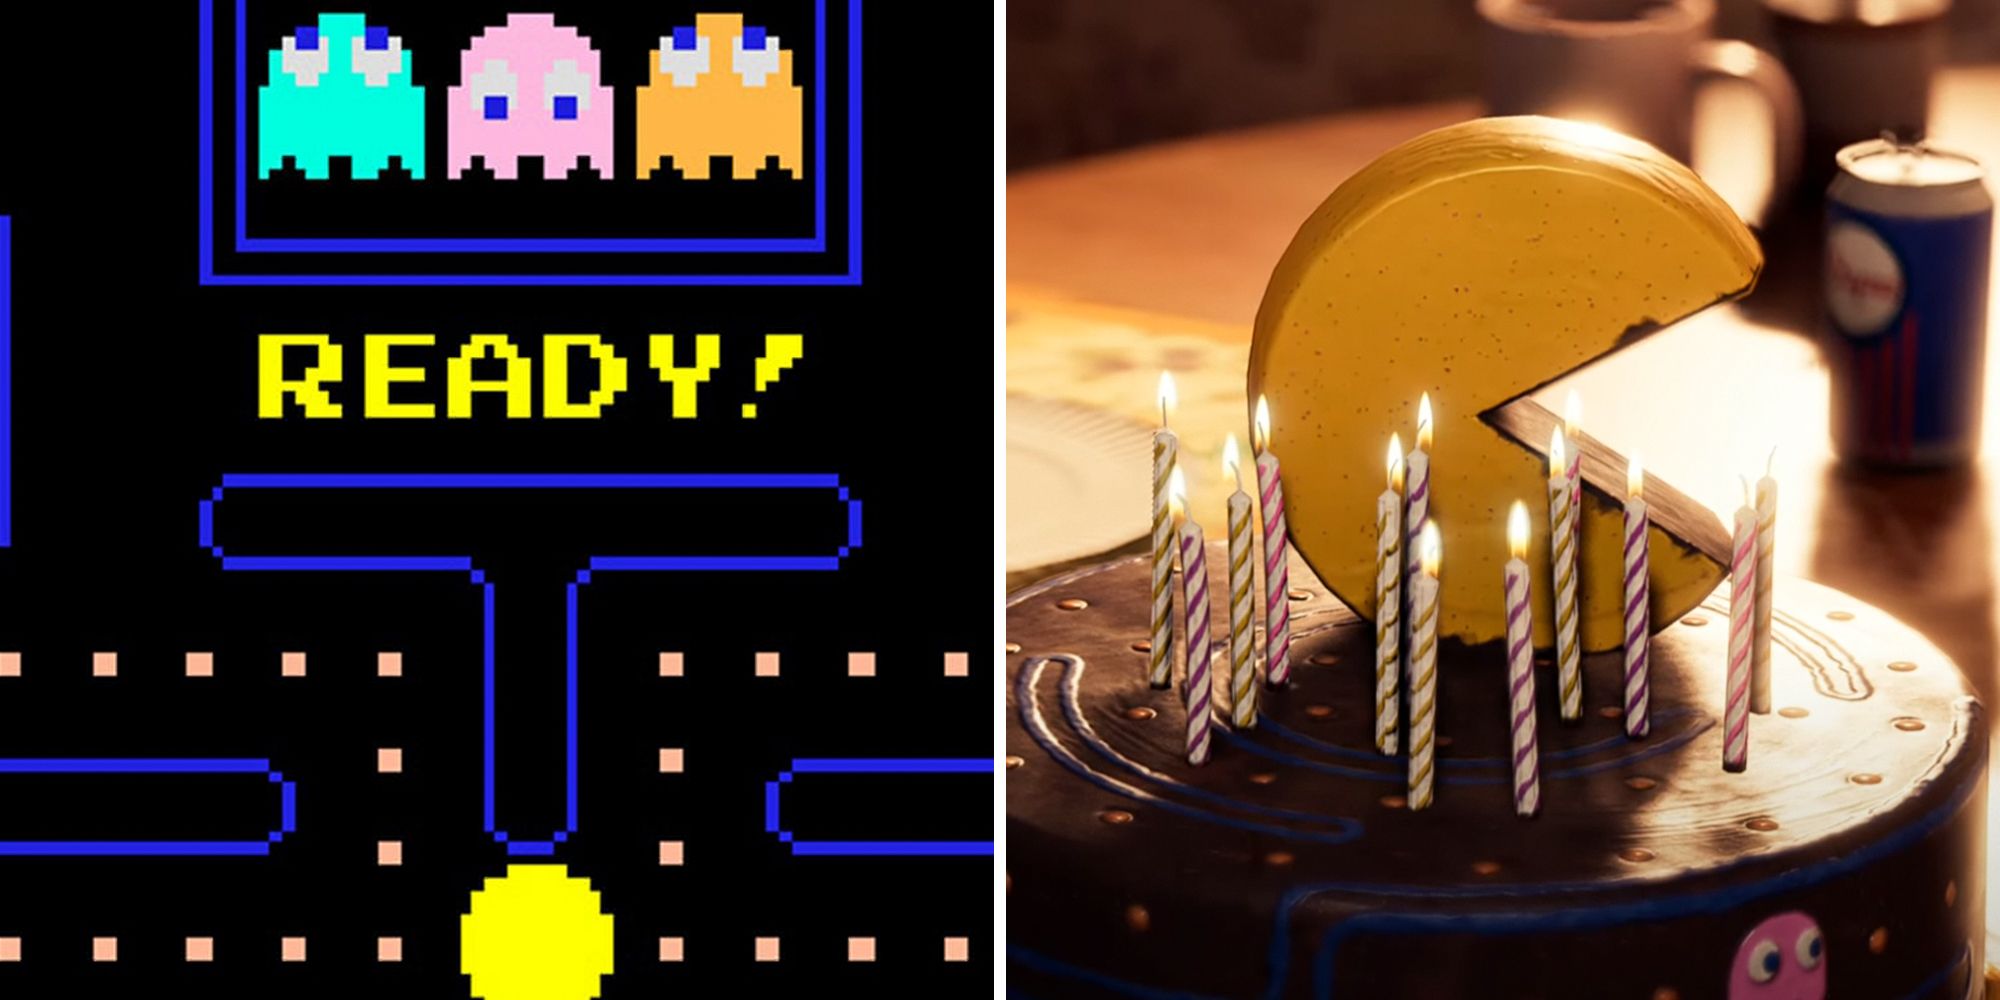 Marvel's Guardians Of The Galaxy. Split image. Pac-Man game on left and Pac-Man cake on right.